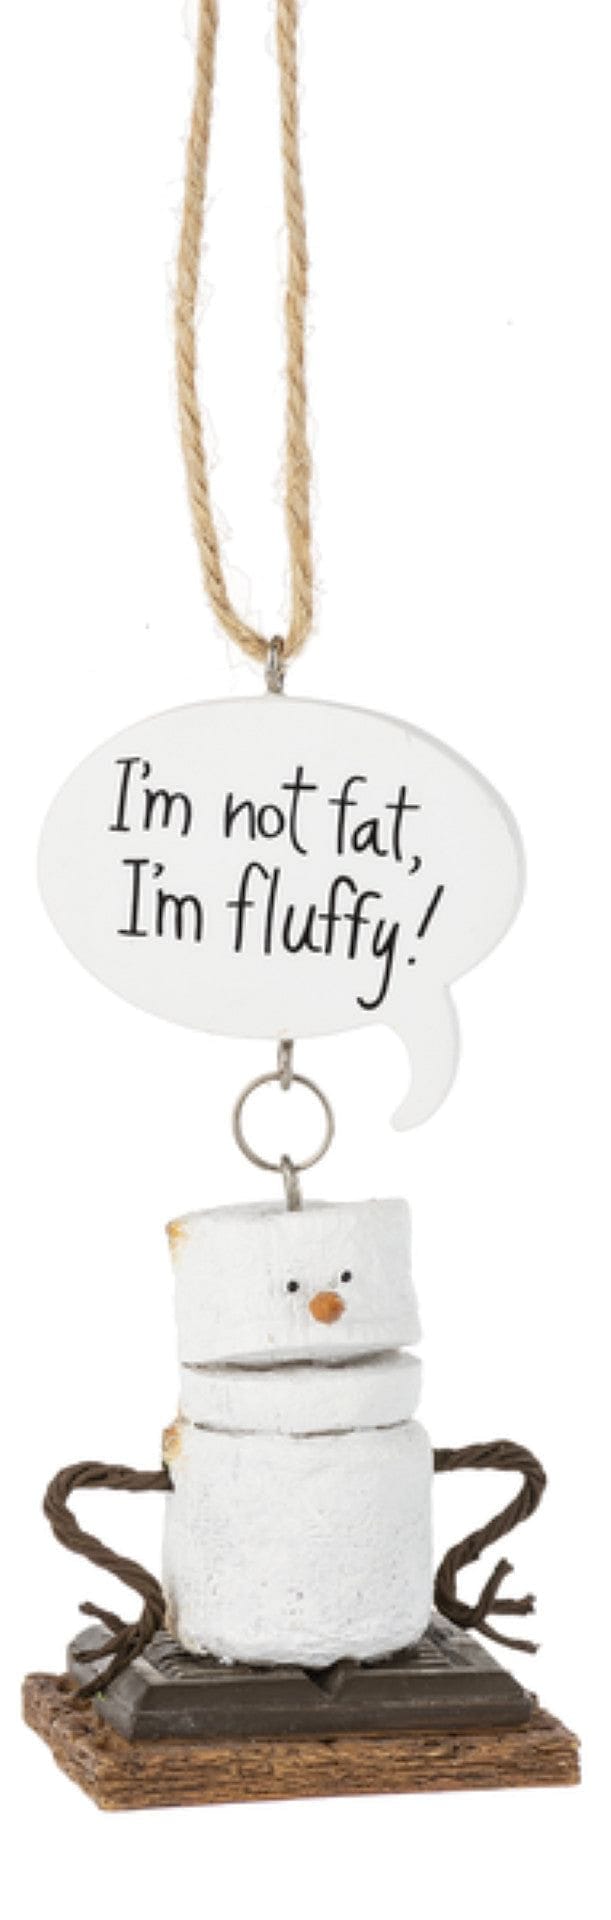 Toasted S'mores Ornament - I'm Not Fat, I'm Fluffy! - Shelburne Country Store